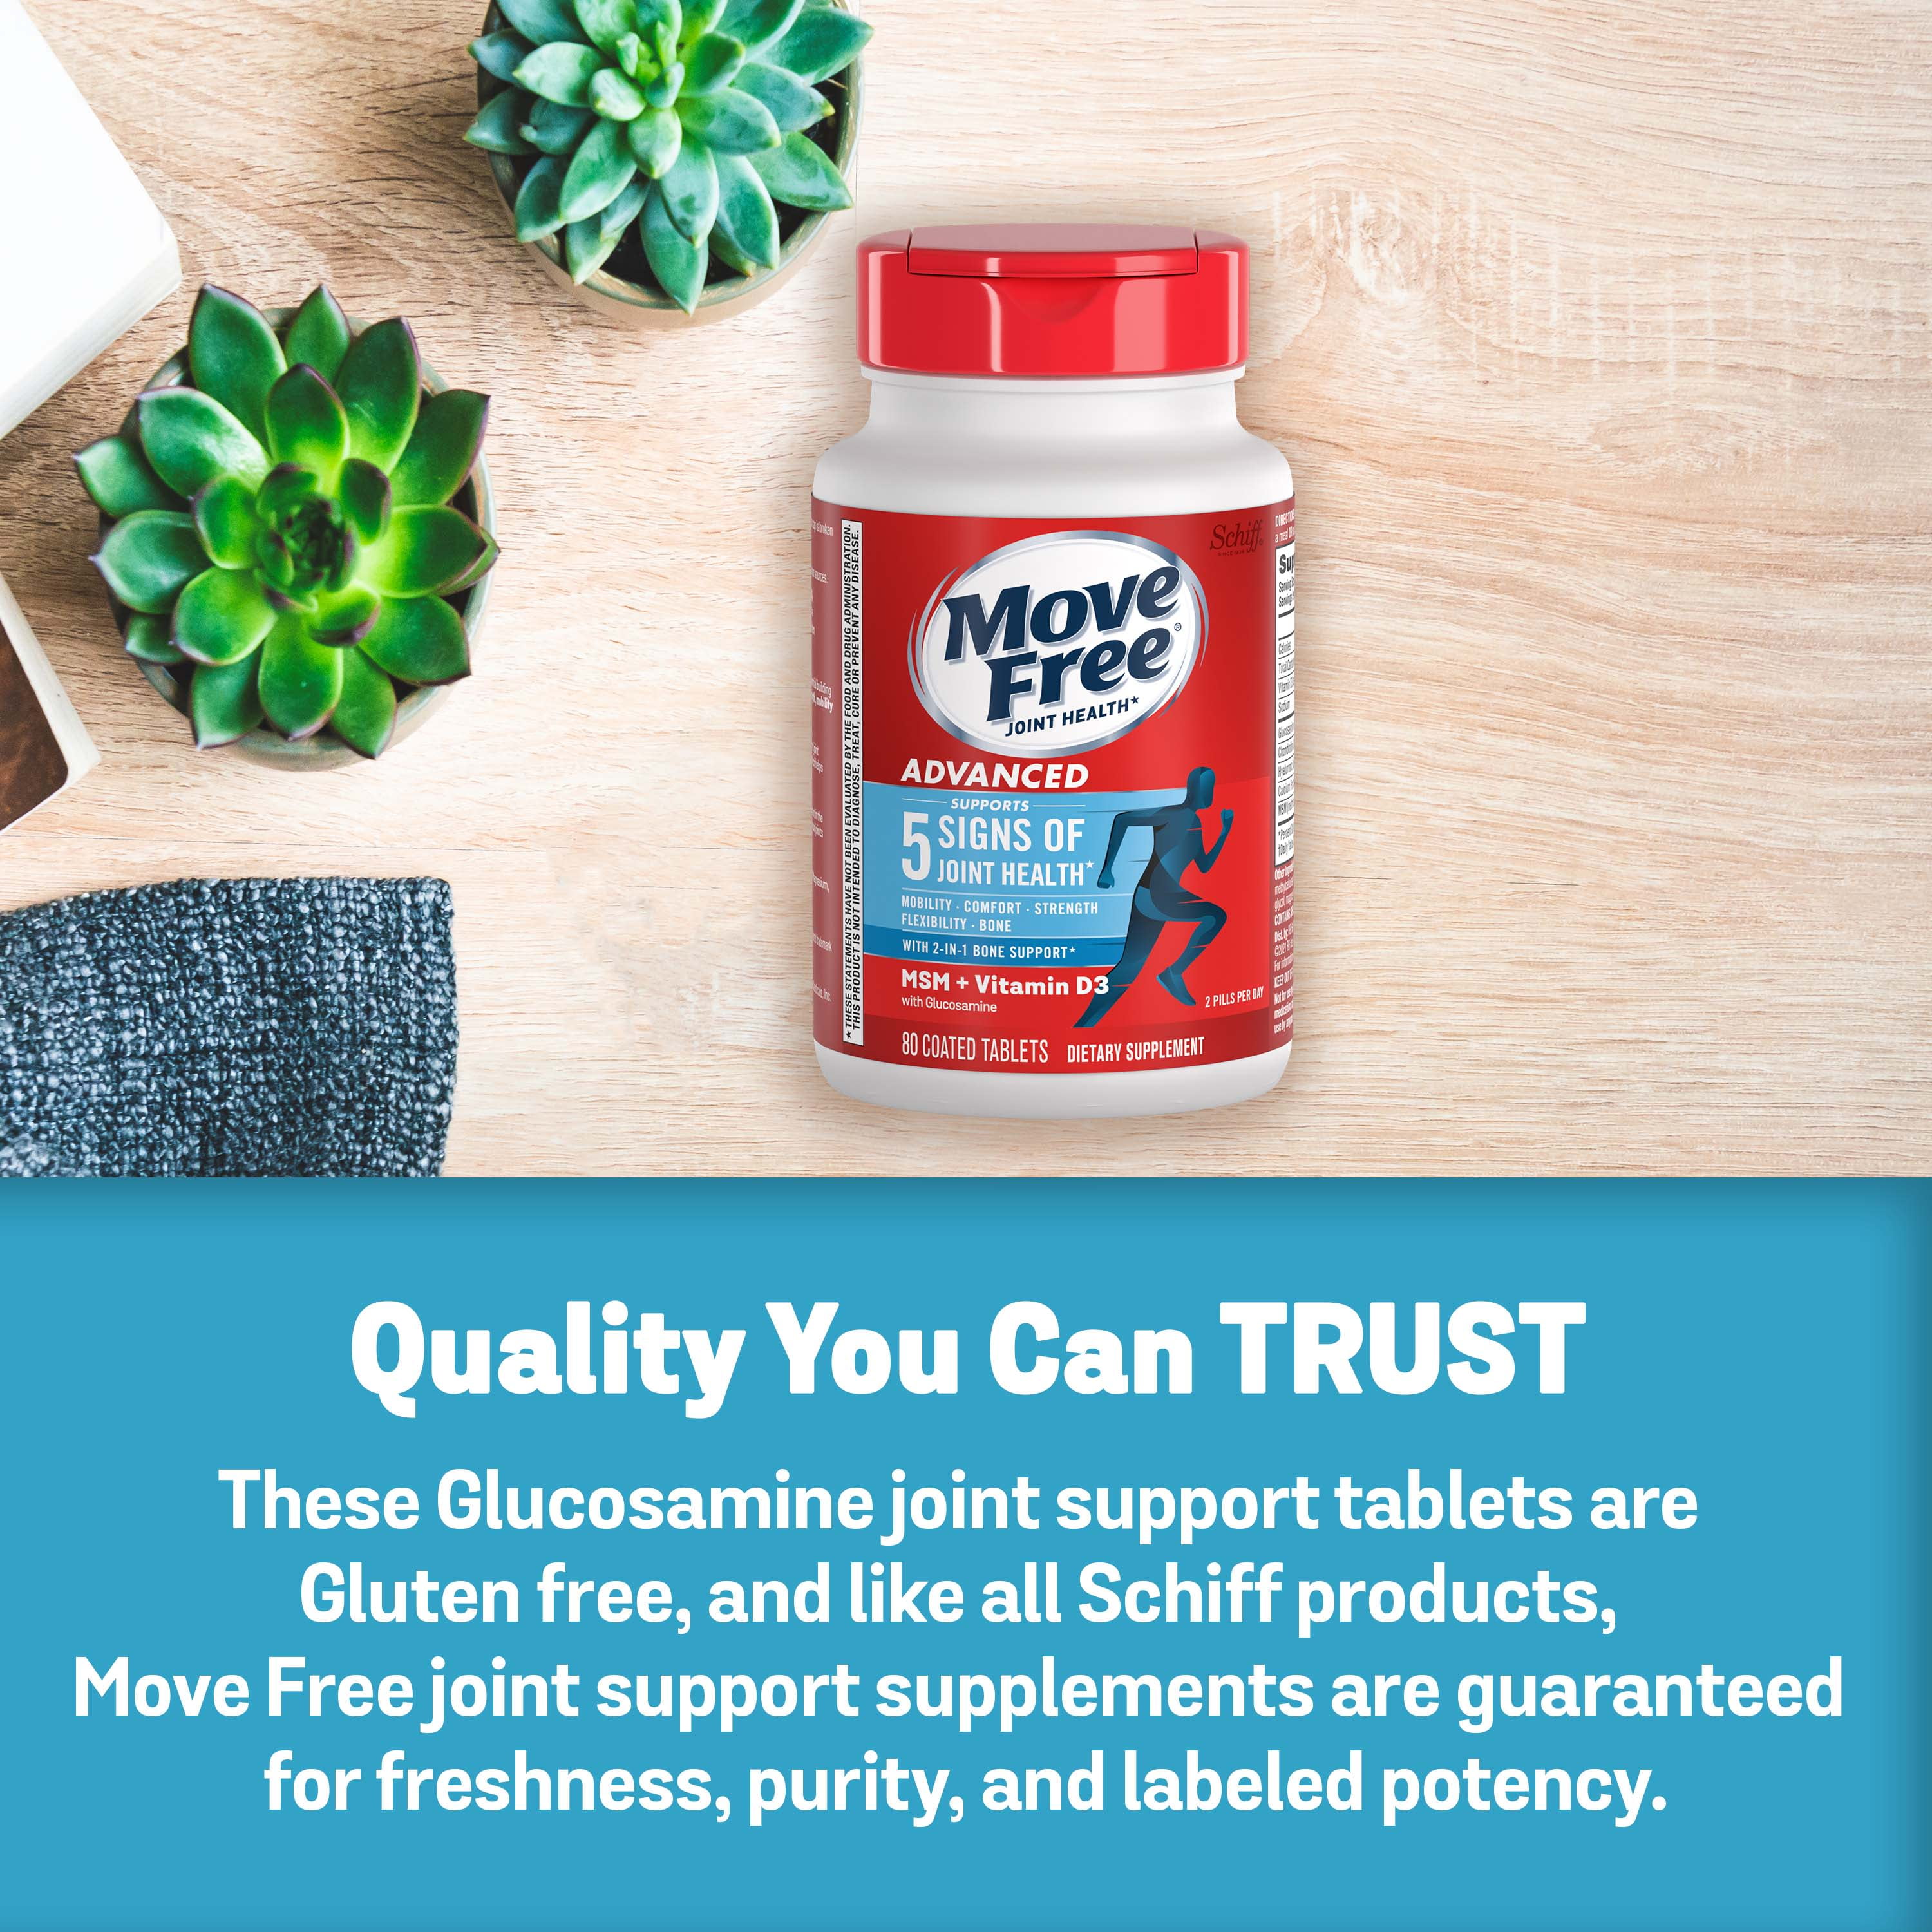 Move Free Advanced Glucosamine Chondroitin + Calcium Fructoborate Joint  Support Supplement, Supports Mobility Comfort Strength Flexibility & Bone -  200 Tablets (100 servings)* GC 200ct